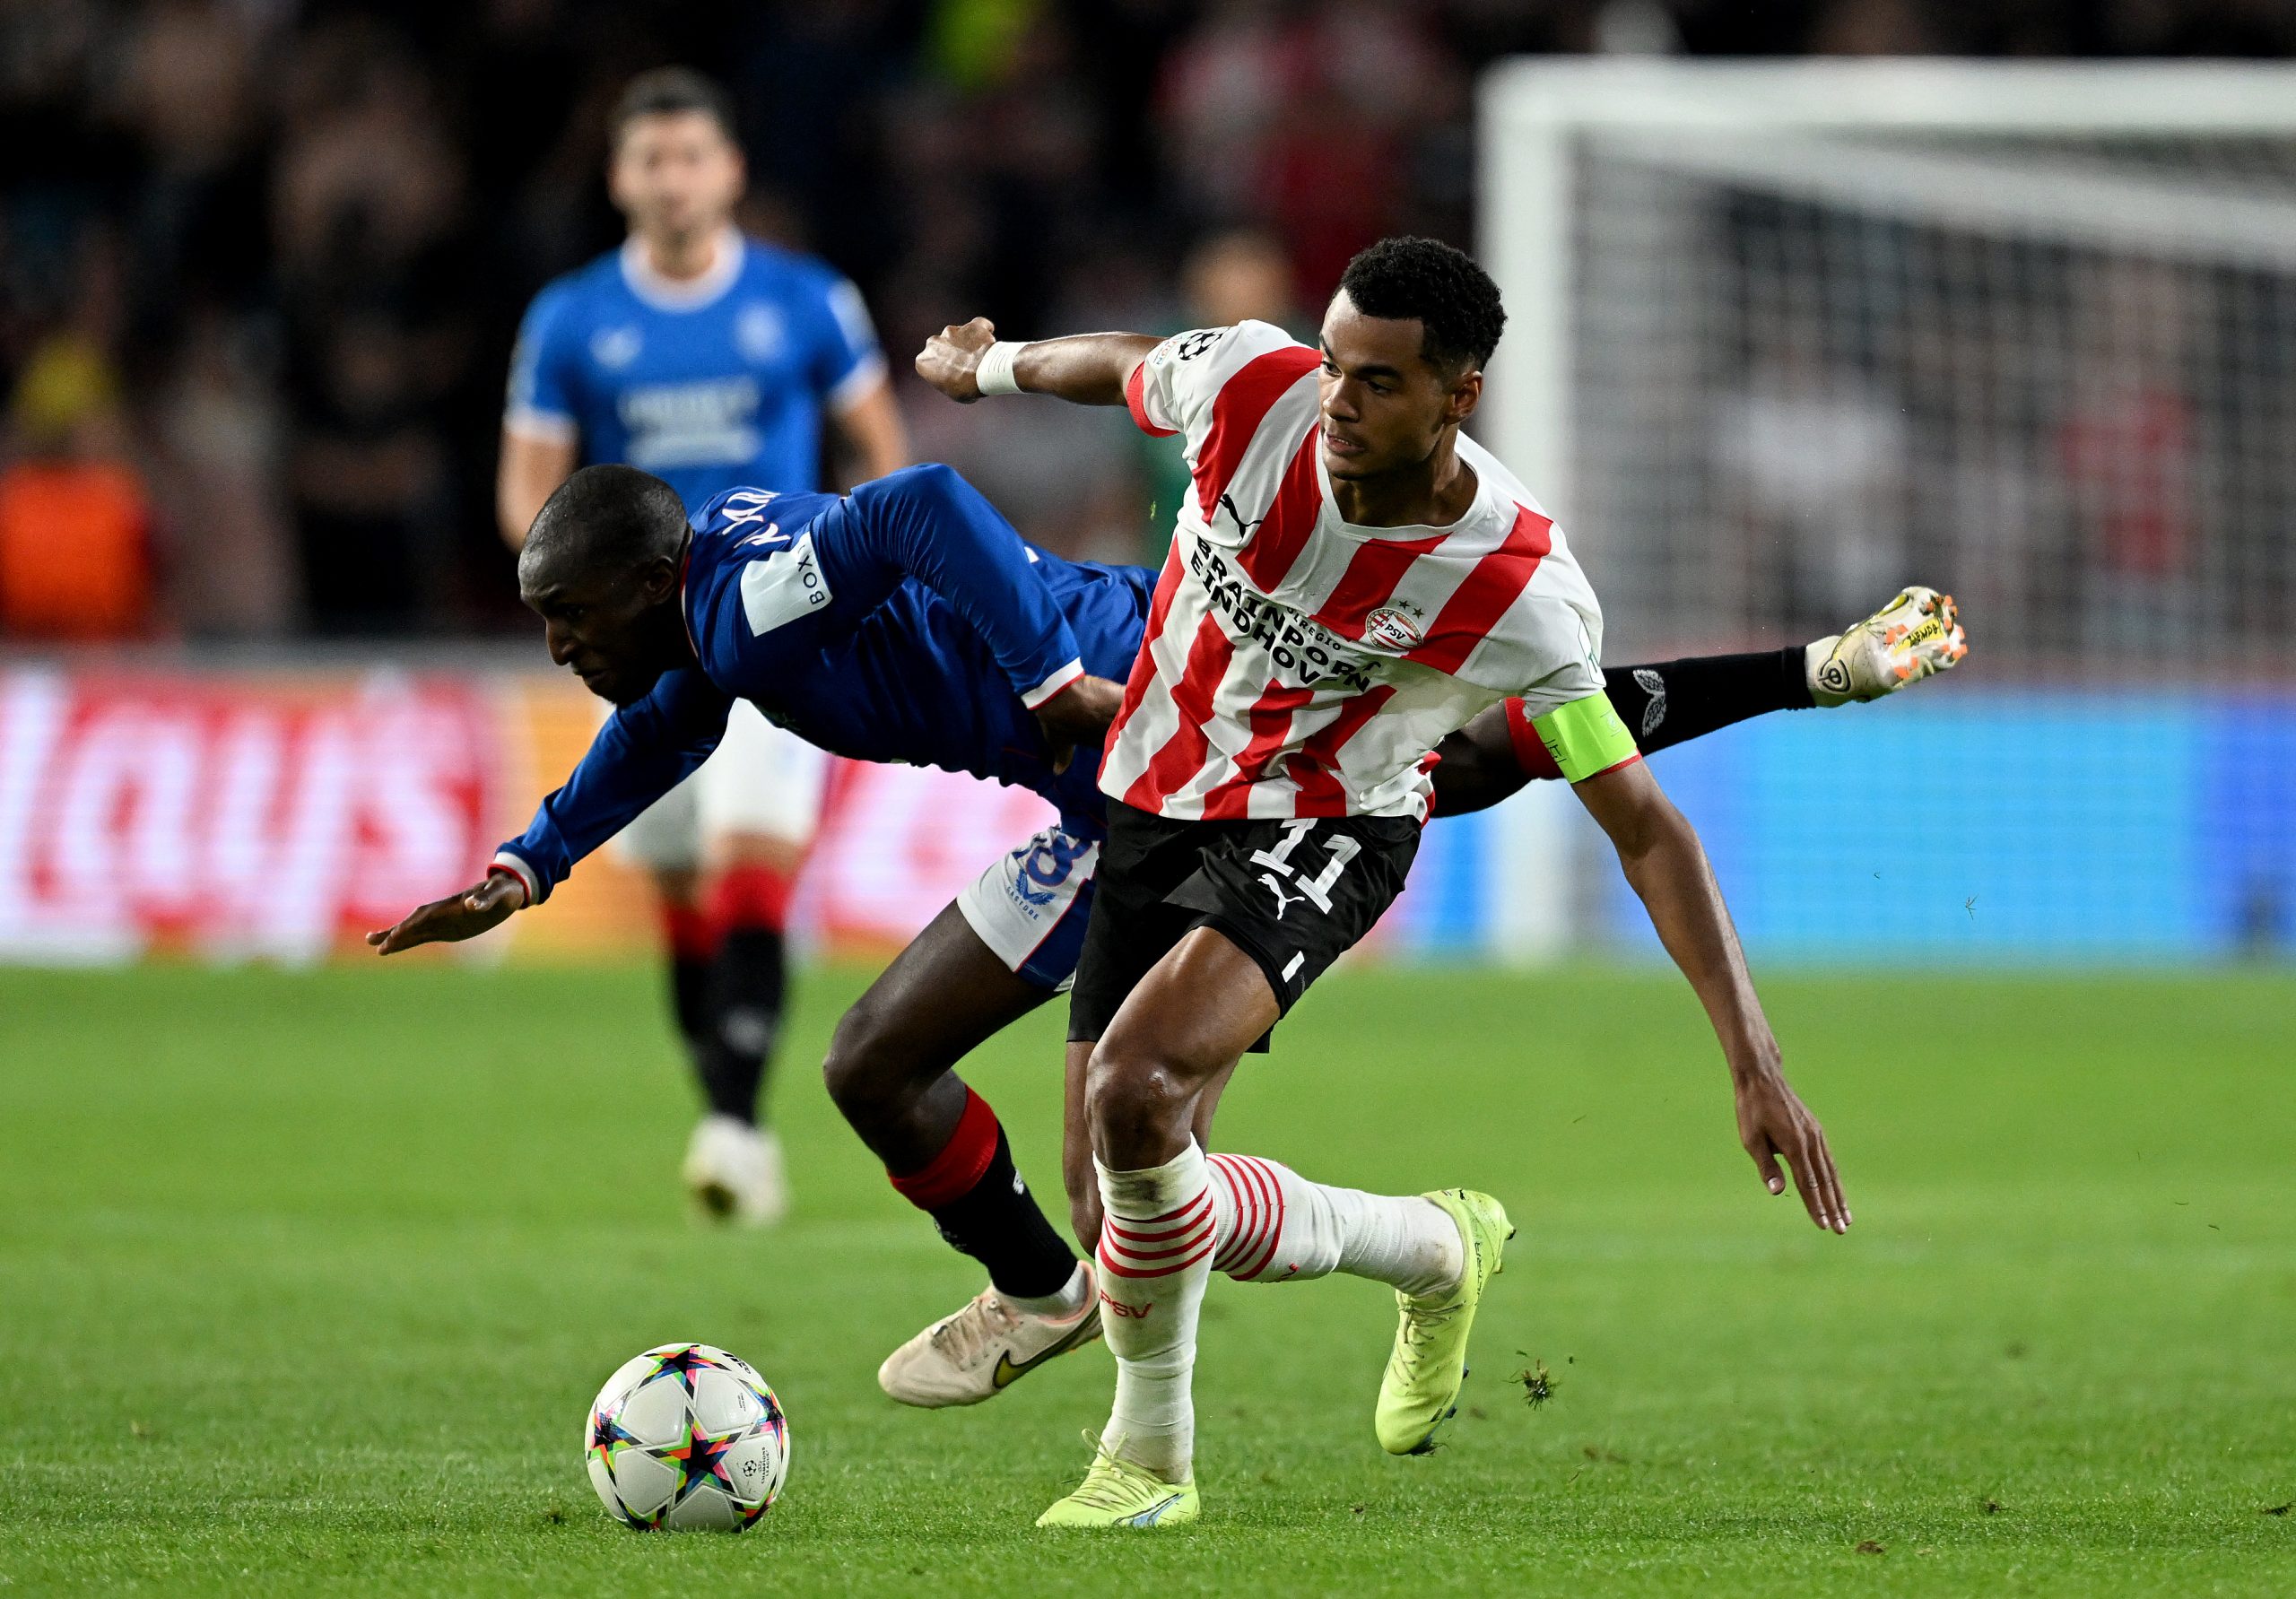 Transfer News: PSV Eindhoven set asking price for Cody Gakpo amid Manchester United interest. (Photo by Christian Kaspar-Bartke/Getty Images)